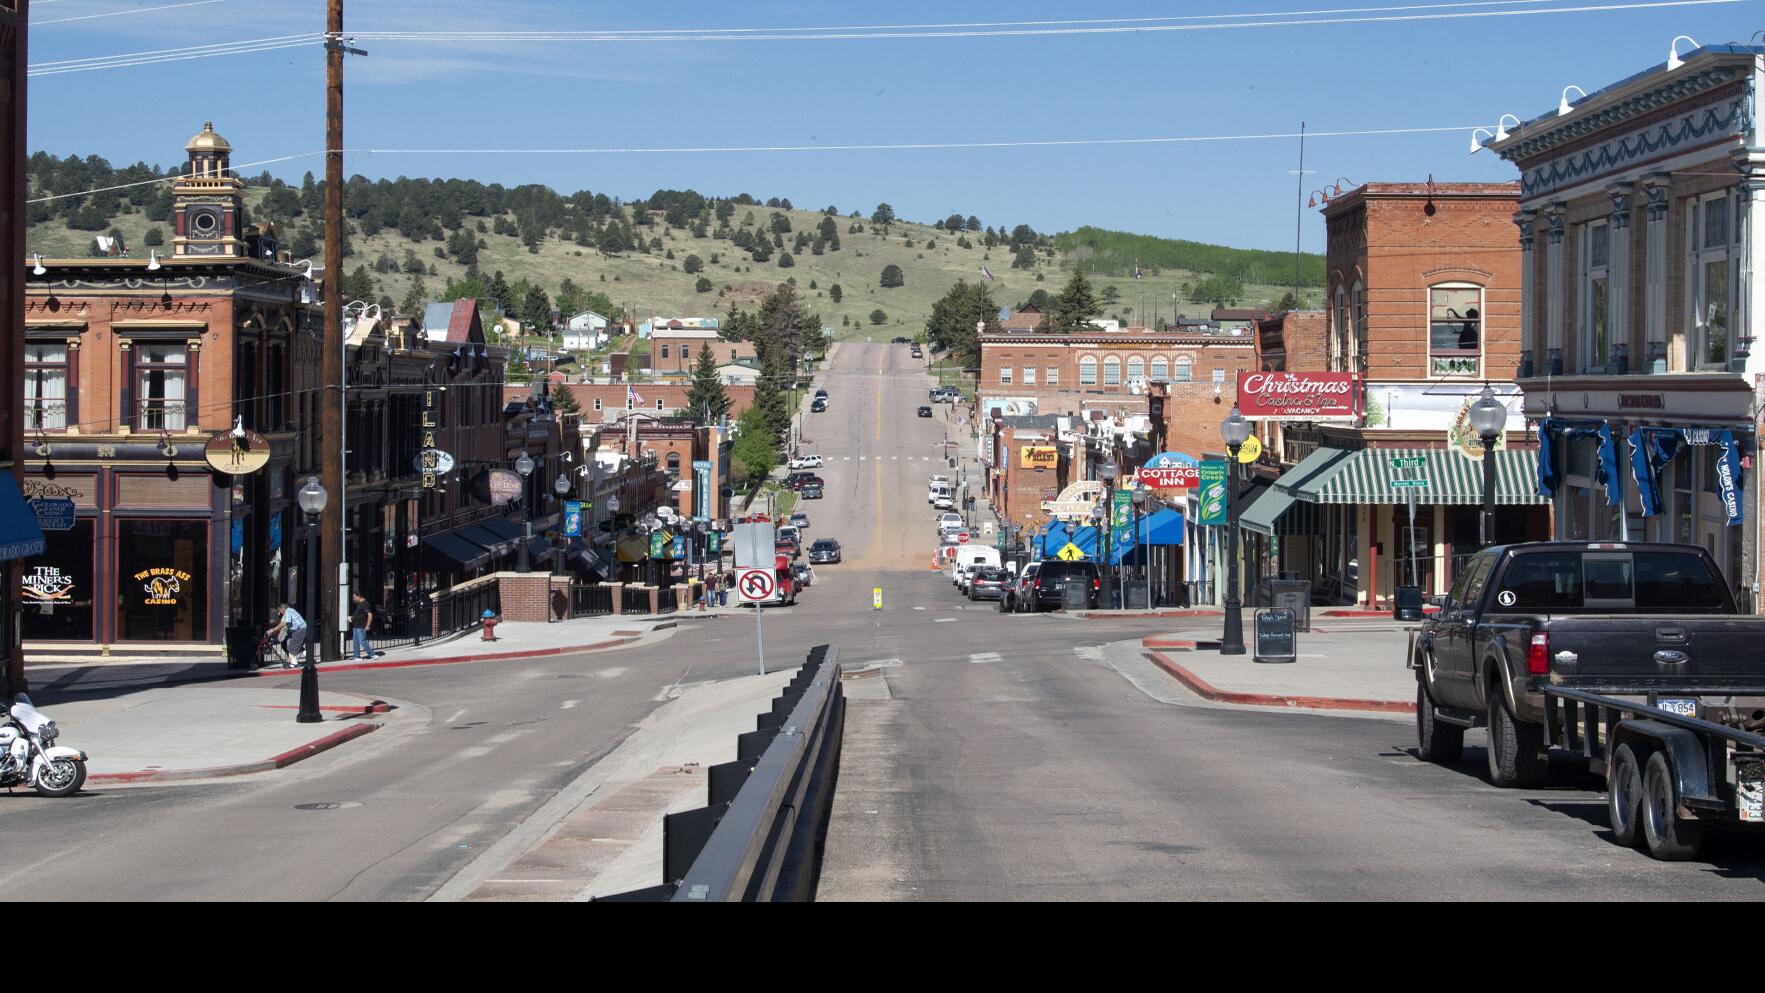 With multiple projects in the works, Cripple Creek sees movement